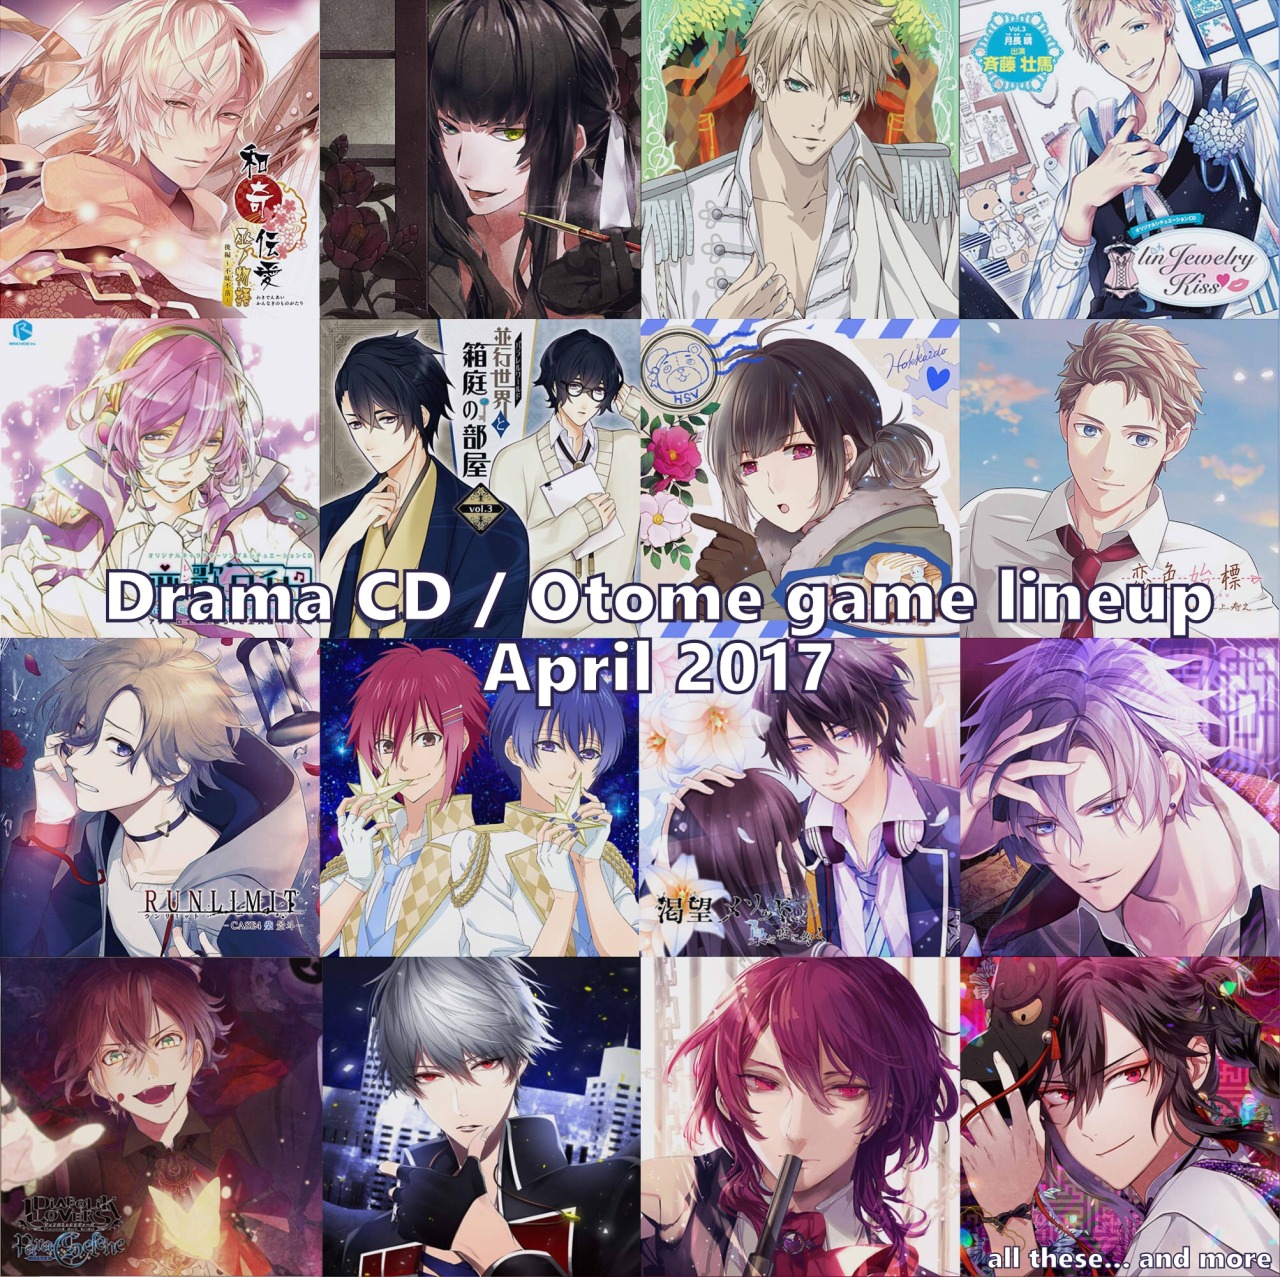 health is bad hiatus — Otome Games and Drama CDs Summary for April 2017